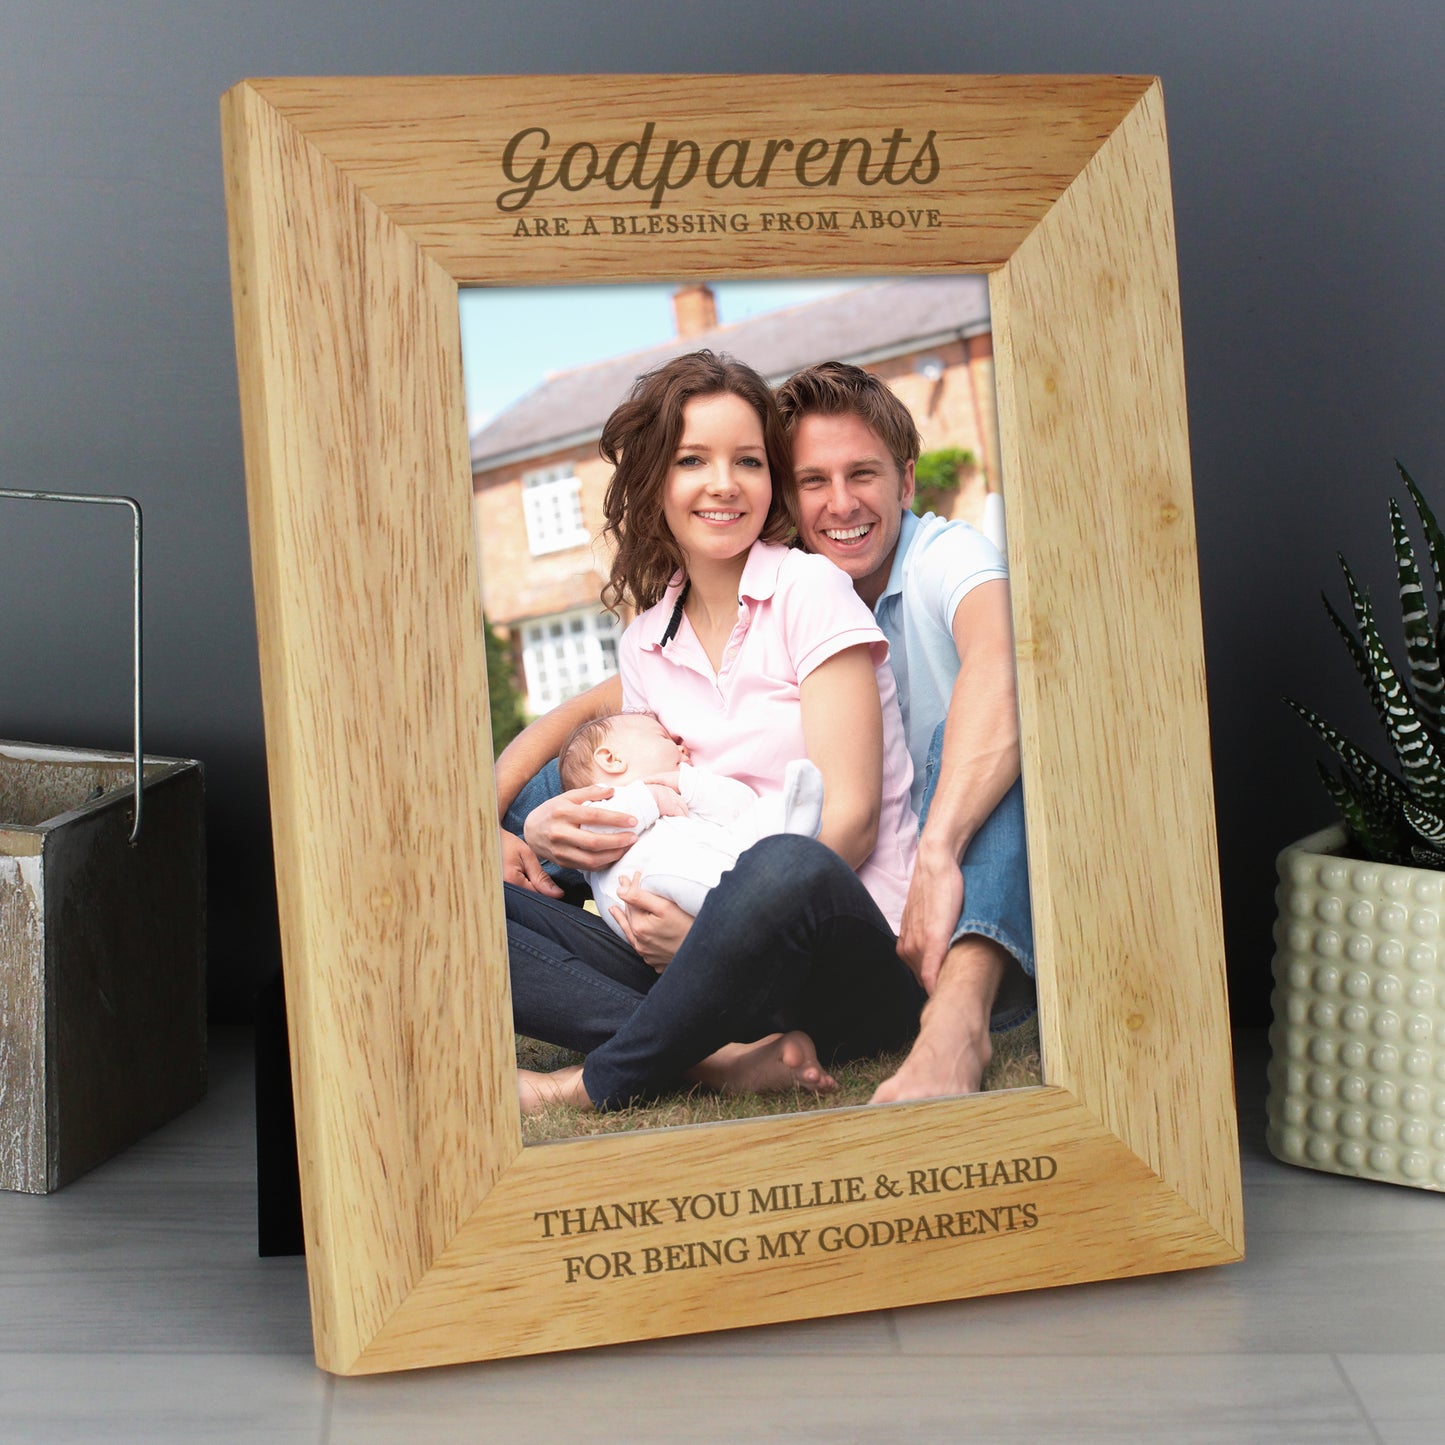 Personalised Godparents 5x7 Wooden Photo Frame - Personalise It!